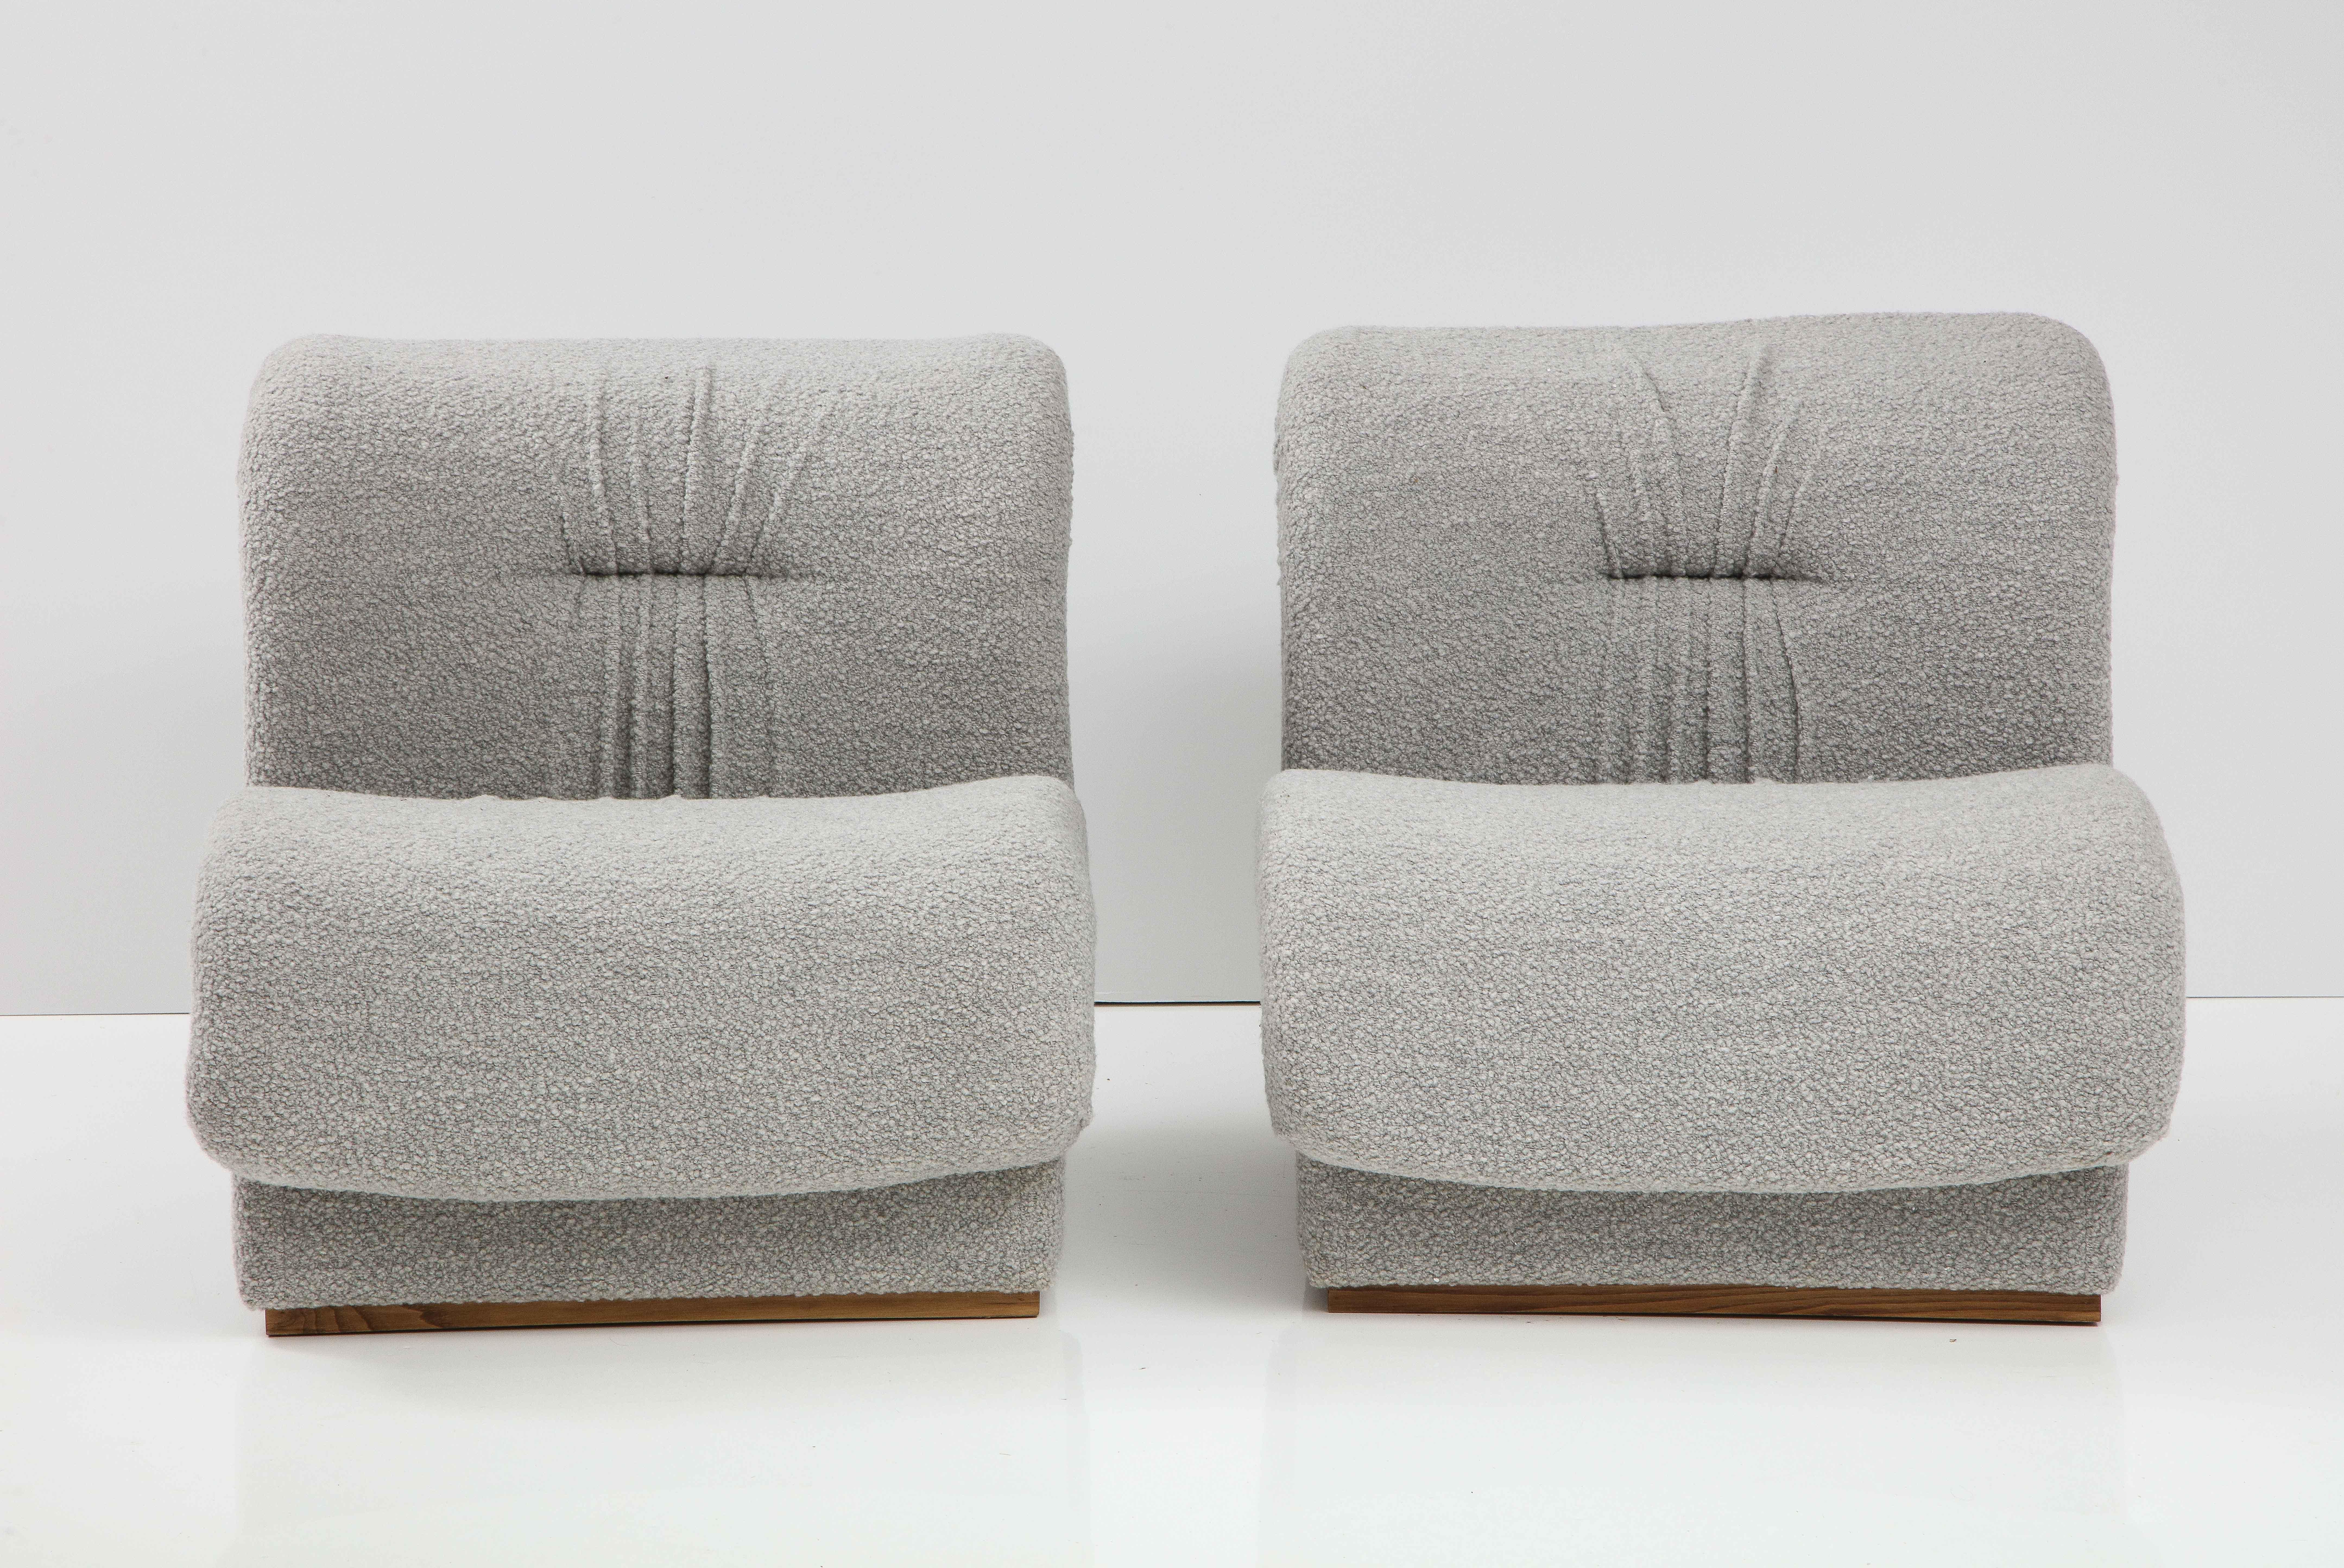 Vintage Pair of grey (or gray) bouclé sculptural lounge or slipper chairs designed and made by Doimo Salotti in Treviso, Italy, circa 1970s. In excellent vintage condition with superb craftsmanship and design lines. Low mid-century modern profile